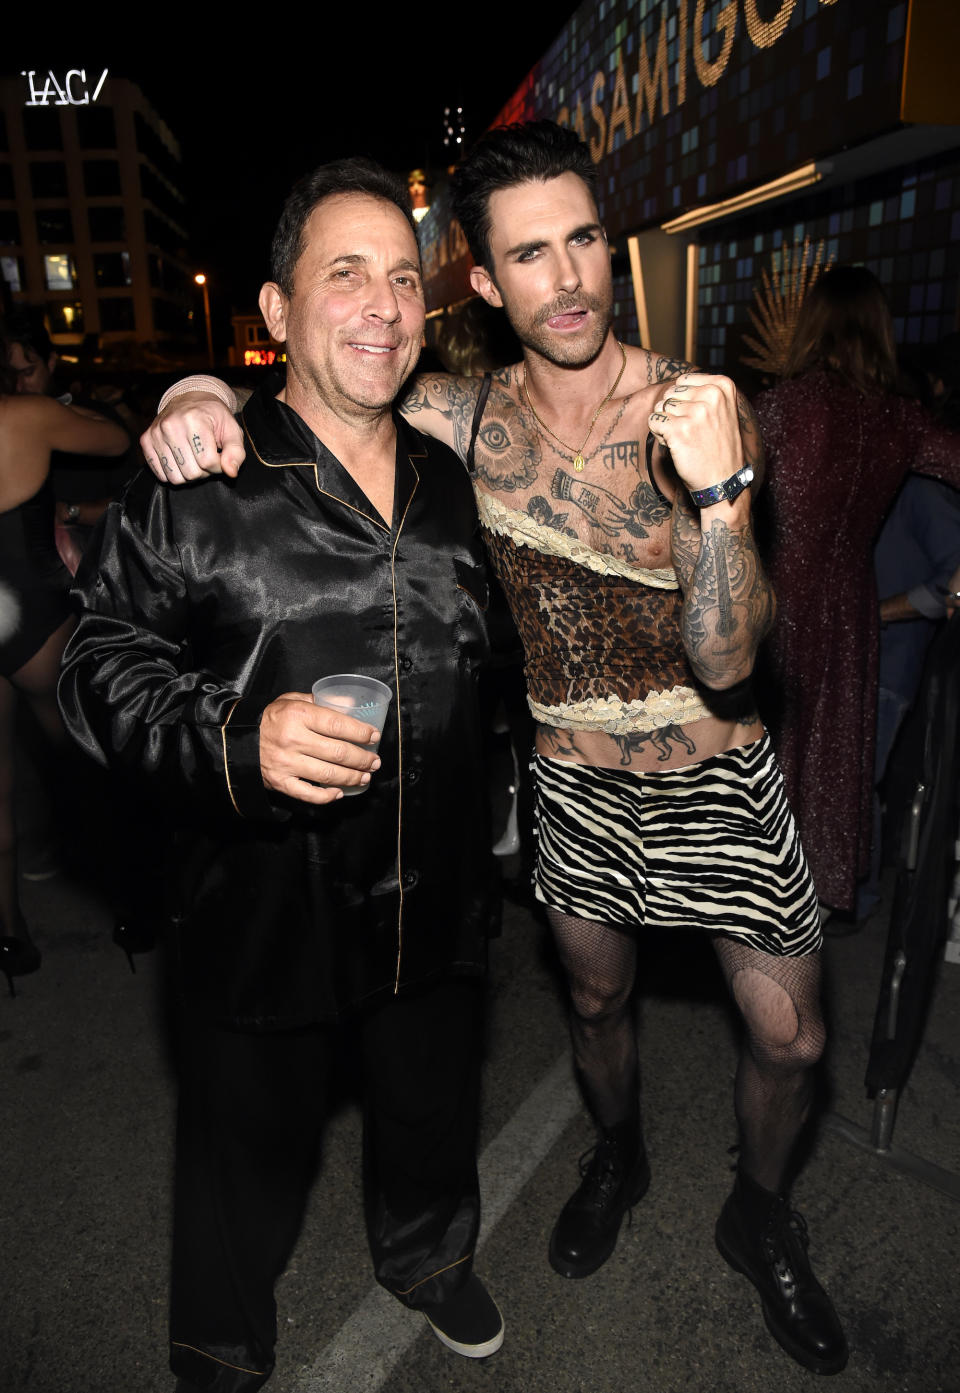 The Maroon 5 frontman showed his feminine side at the annual Casamigos Halloween party.